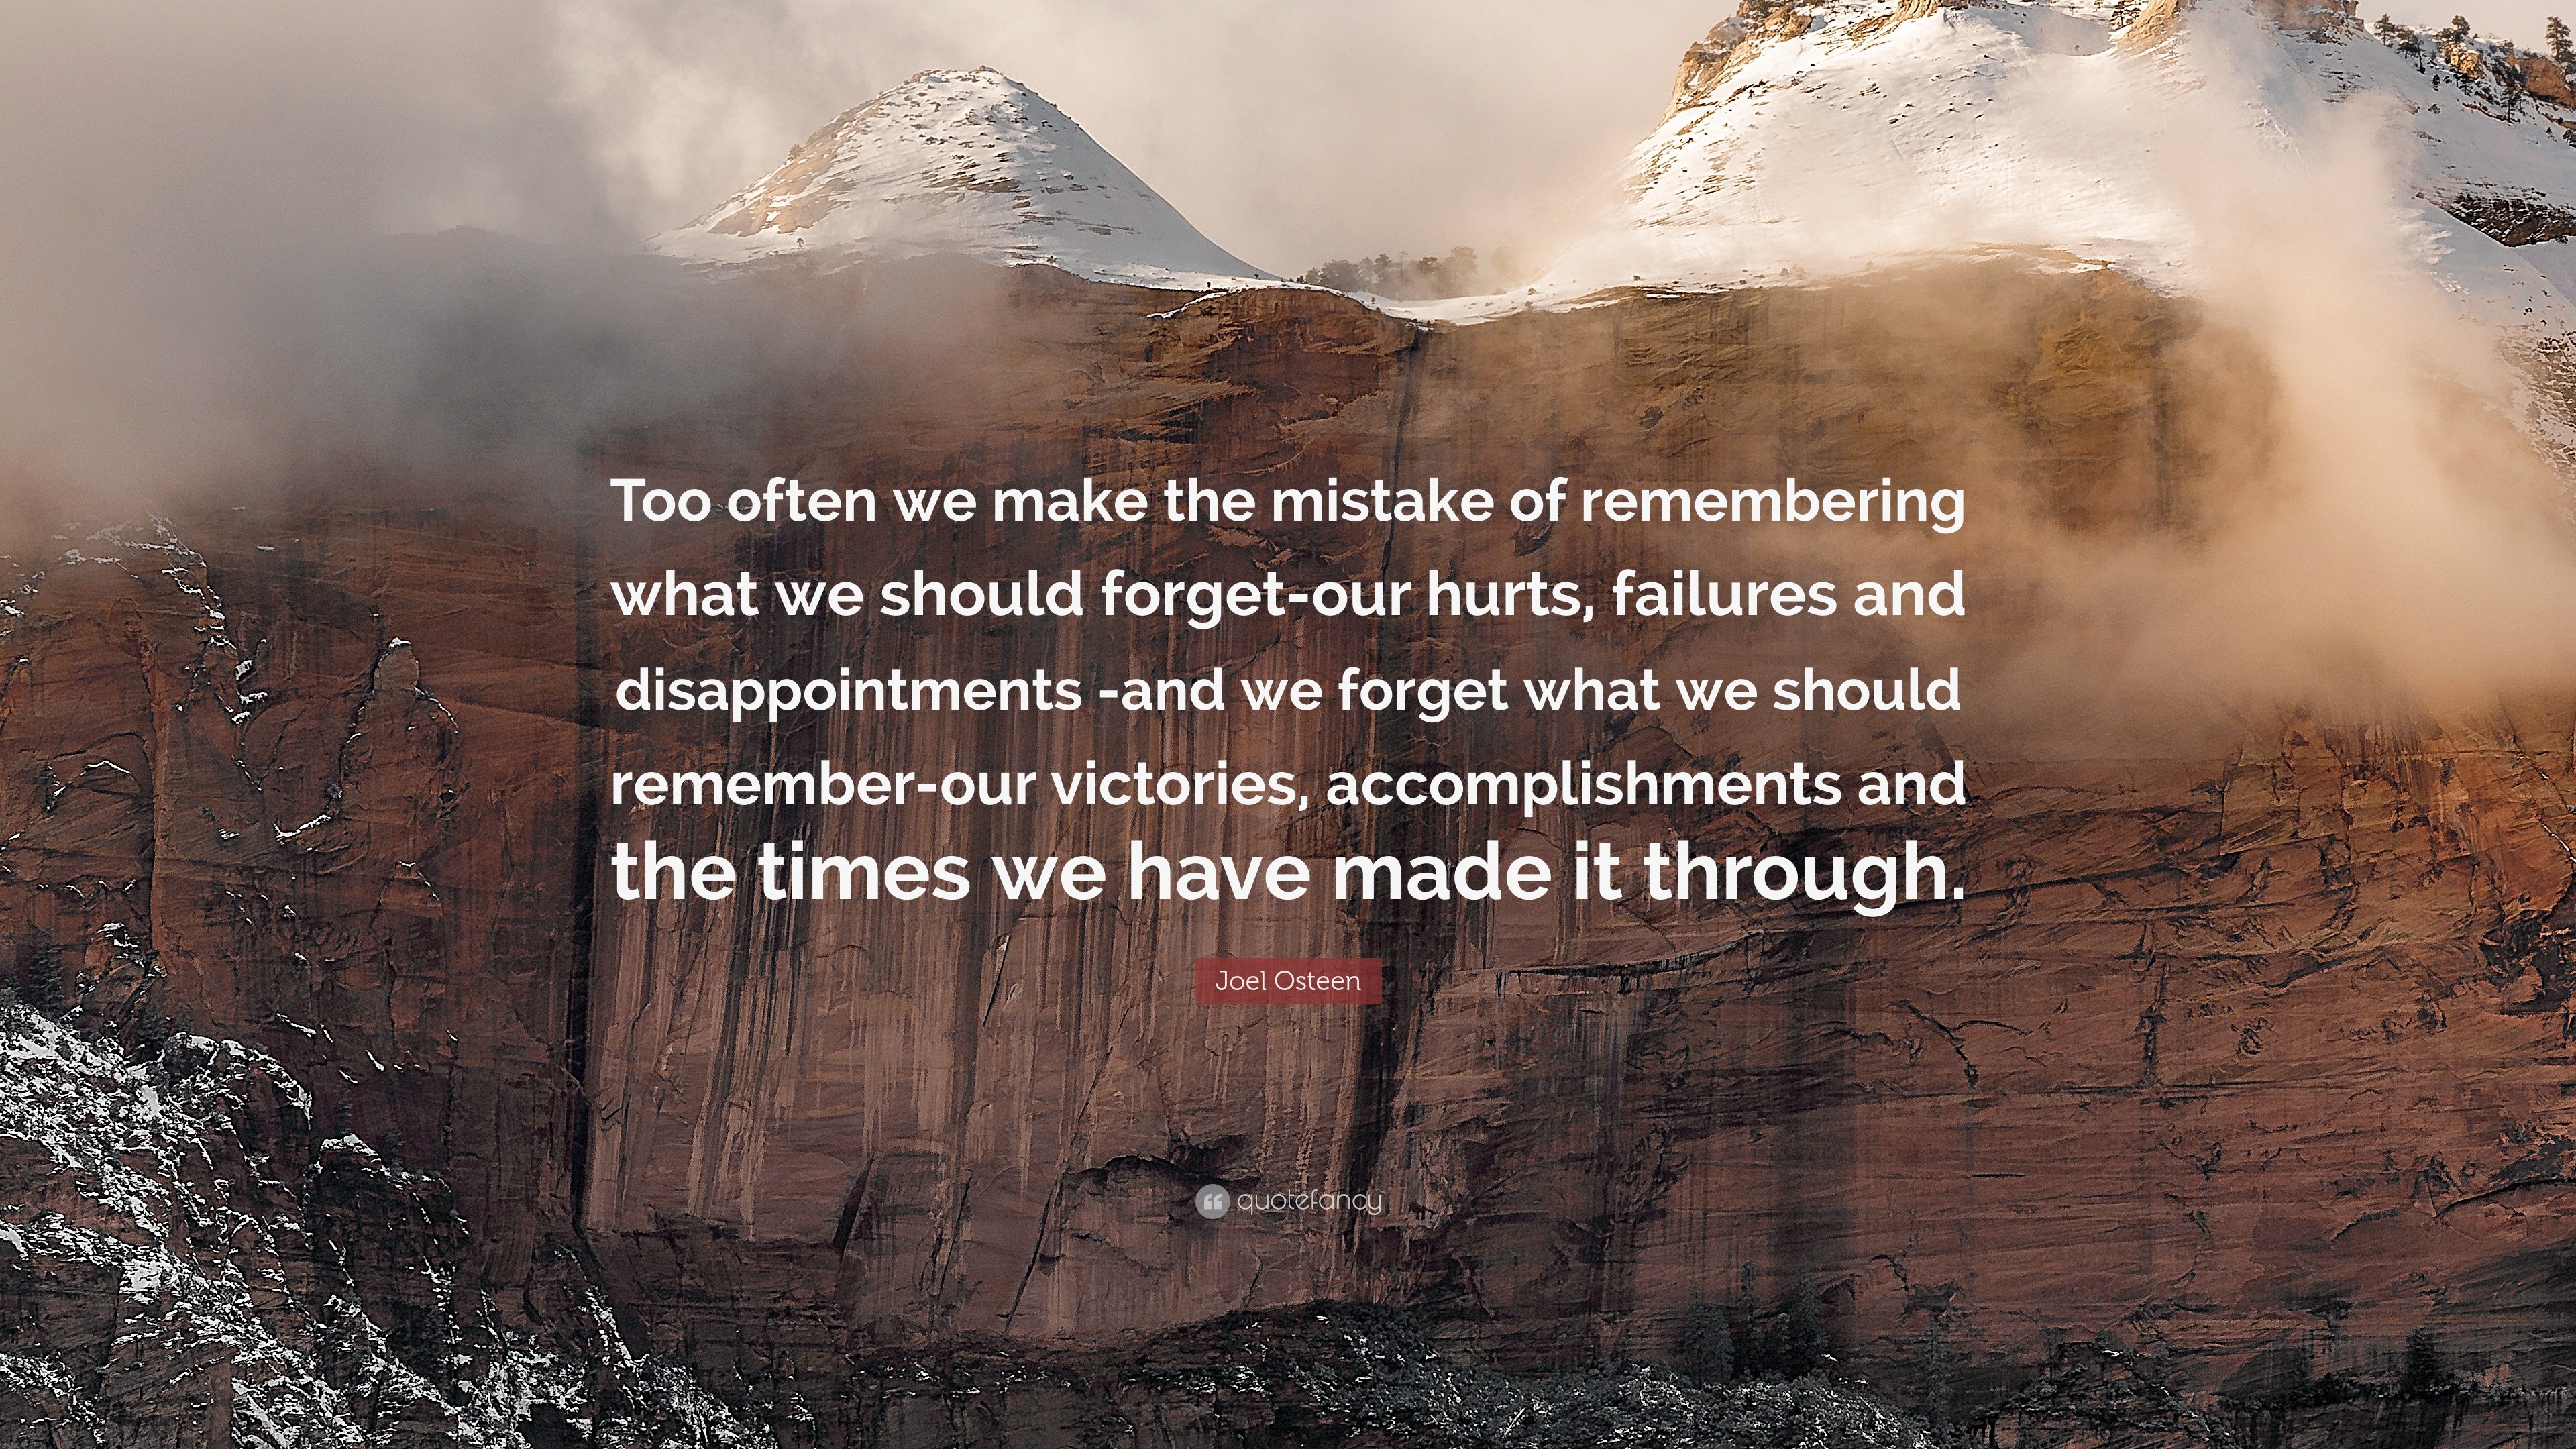 We often focus on the regrets of our mistakes and forget to learn